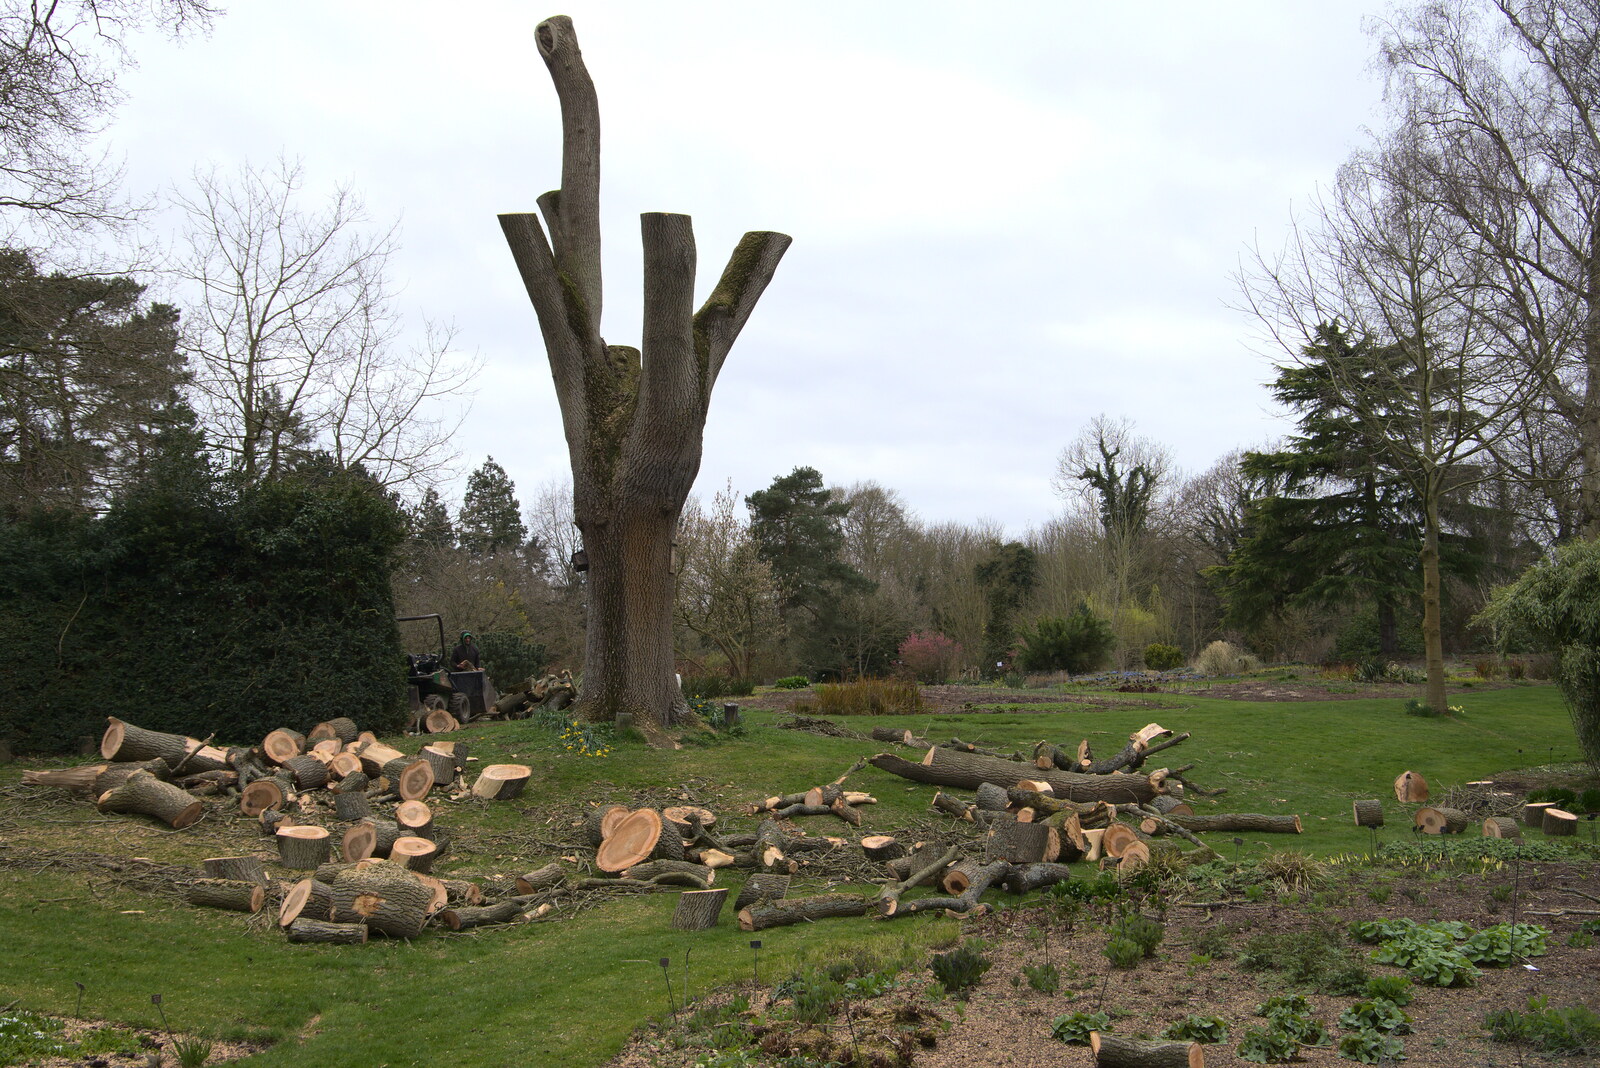 There's some tree surgery going on from A Return to Bressingham Steam and Gardens, Bressingham, Norfolk - 28th March 2021